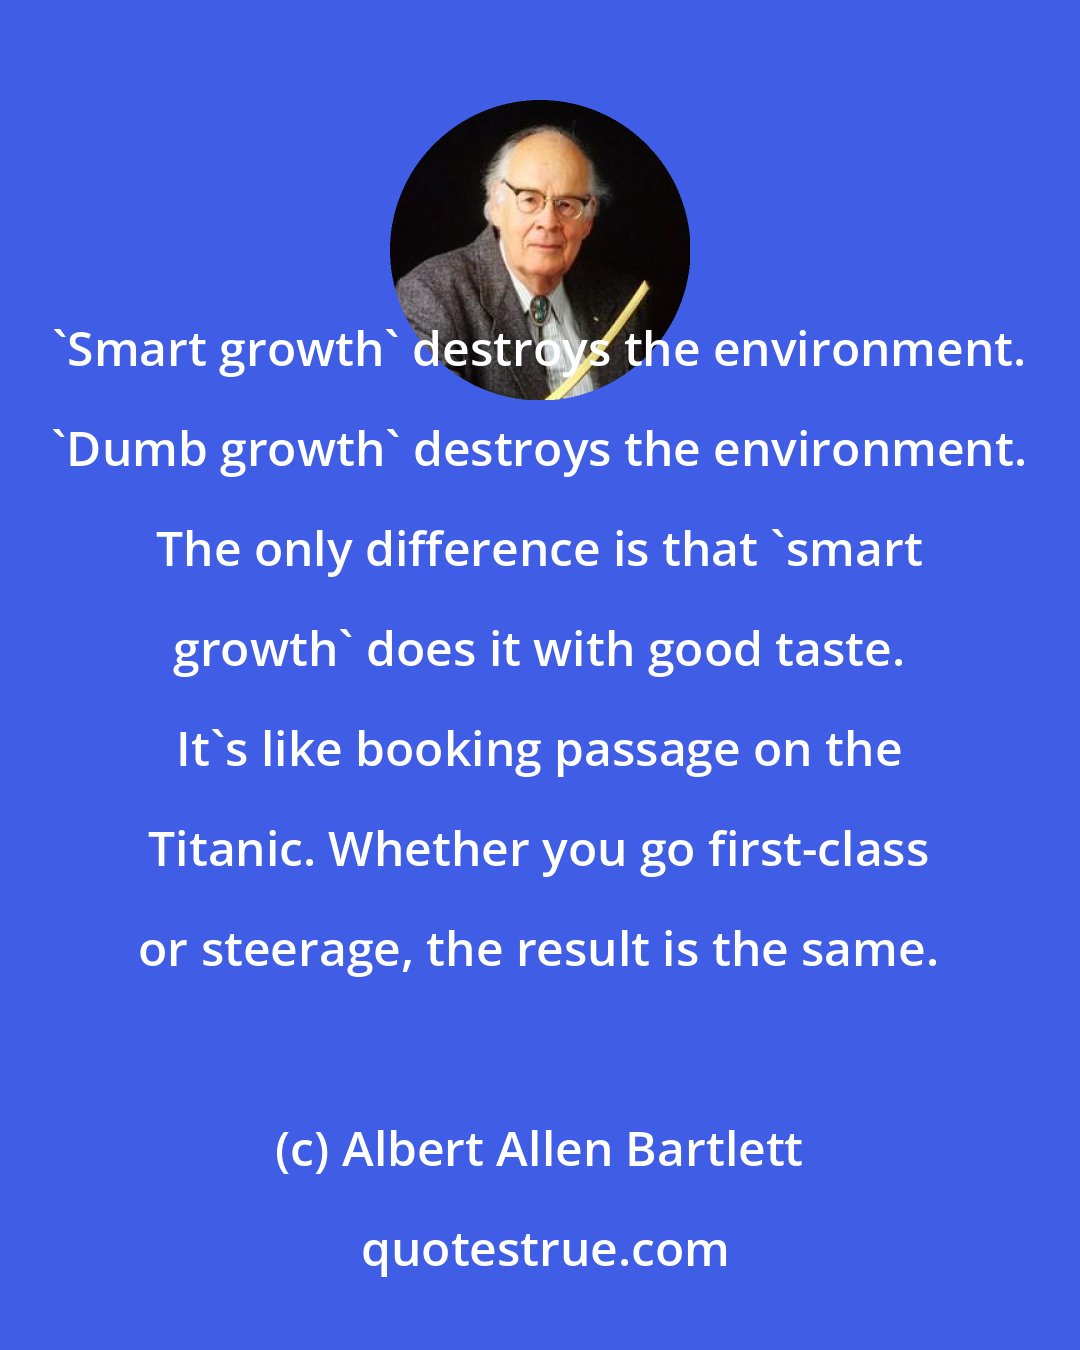 Albert Allen Bartlett: 'Smart growth' destroys the environment. 'Dumb growth' destroys the environment. The only difference is that 'smart growth' does it with good taste. It's like booking passage on the Titanic. Whether you go first-class or steerage, the result is the same.